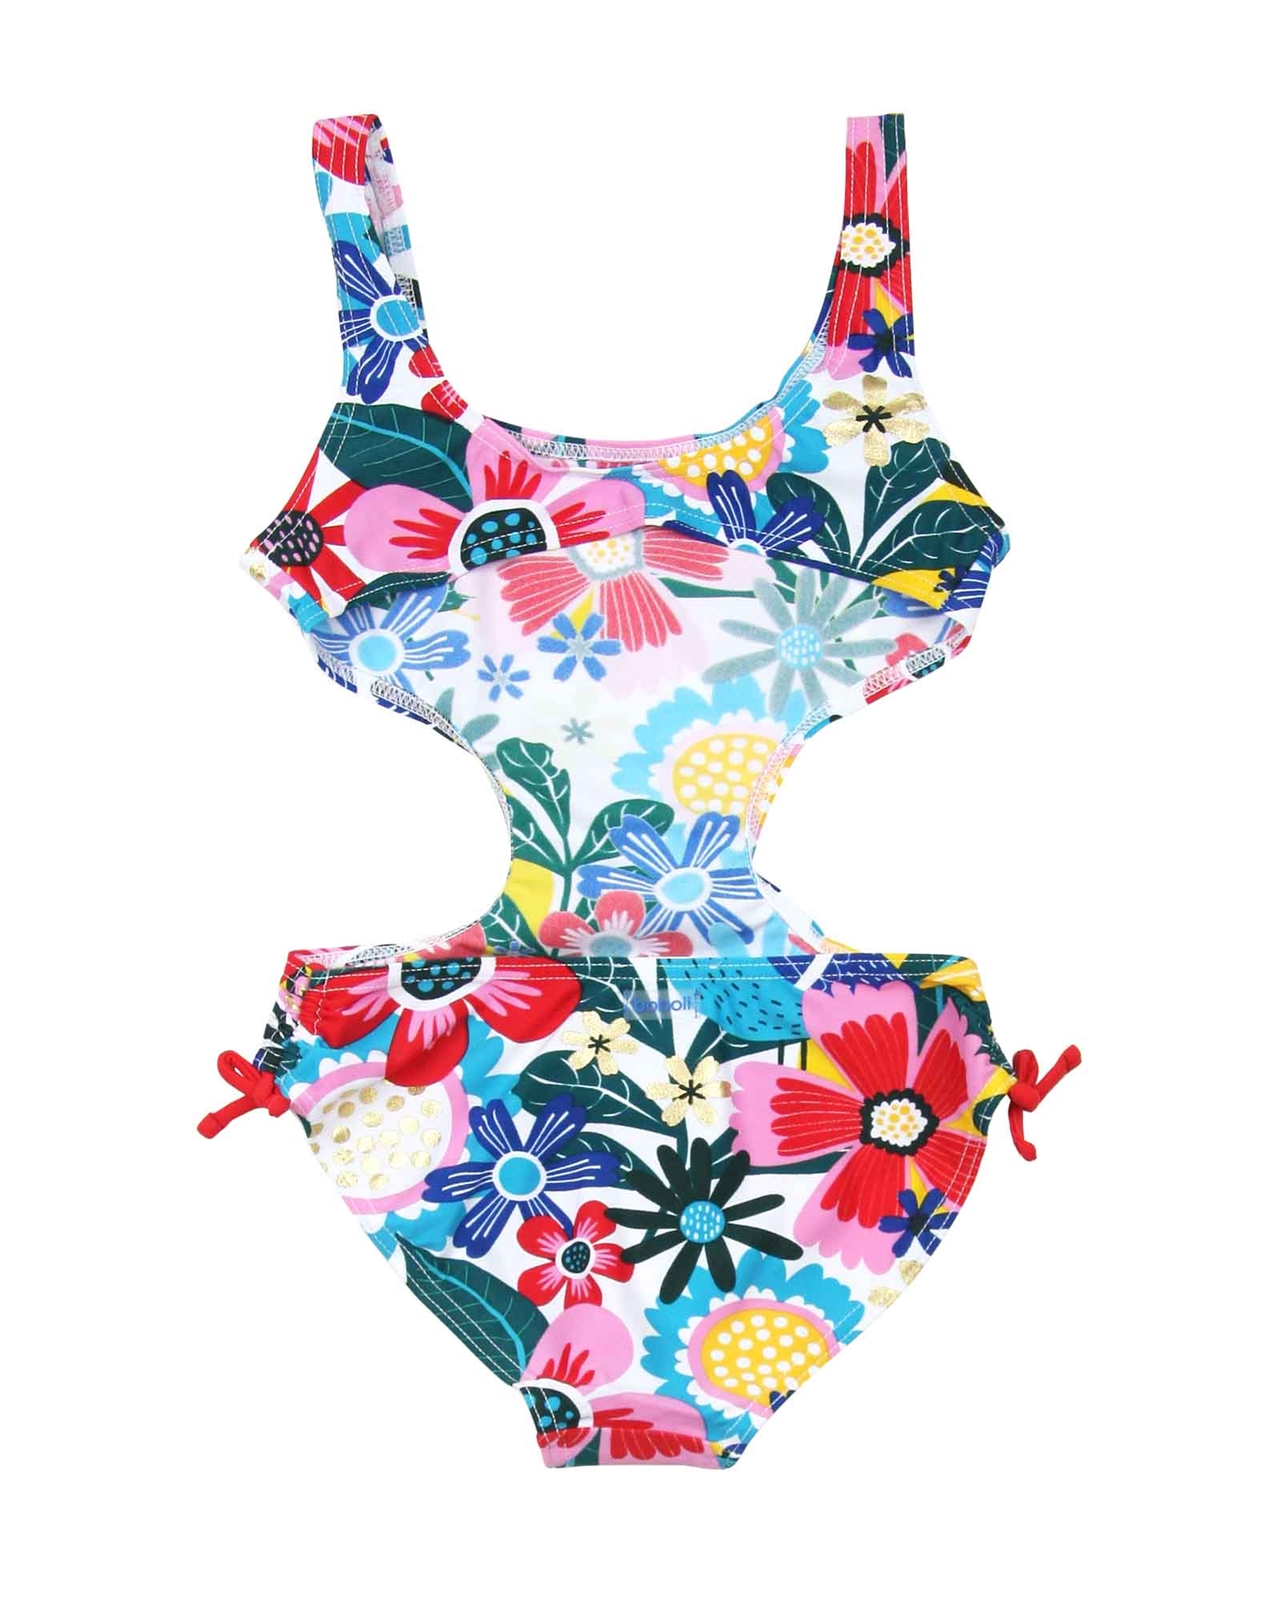 BOBOLI Girl's One-piece Swimsuit in Floral Print, Sizes 4-16 - Spring ...